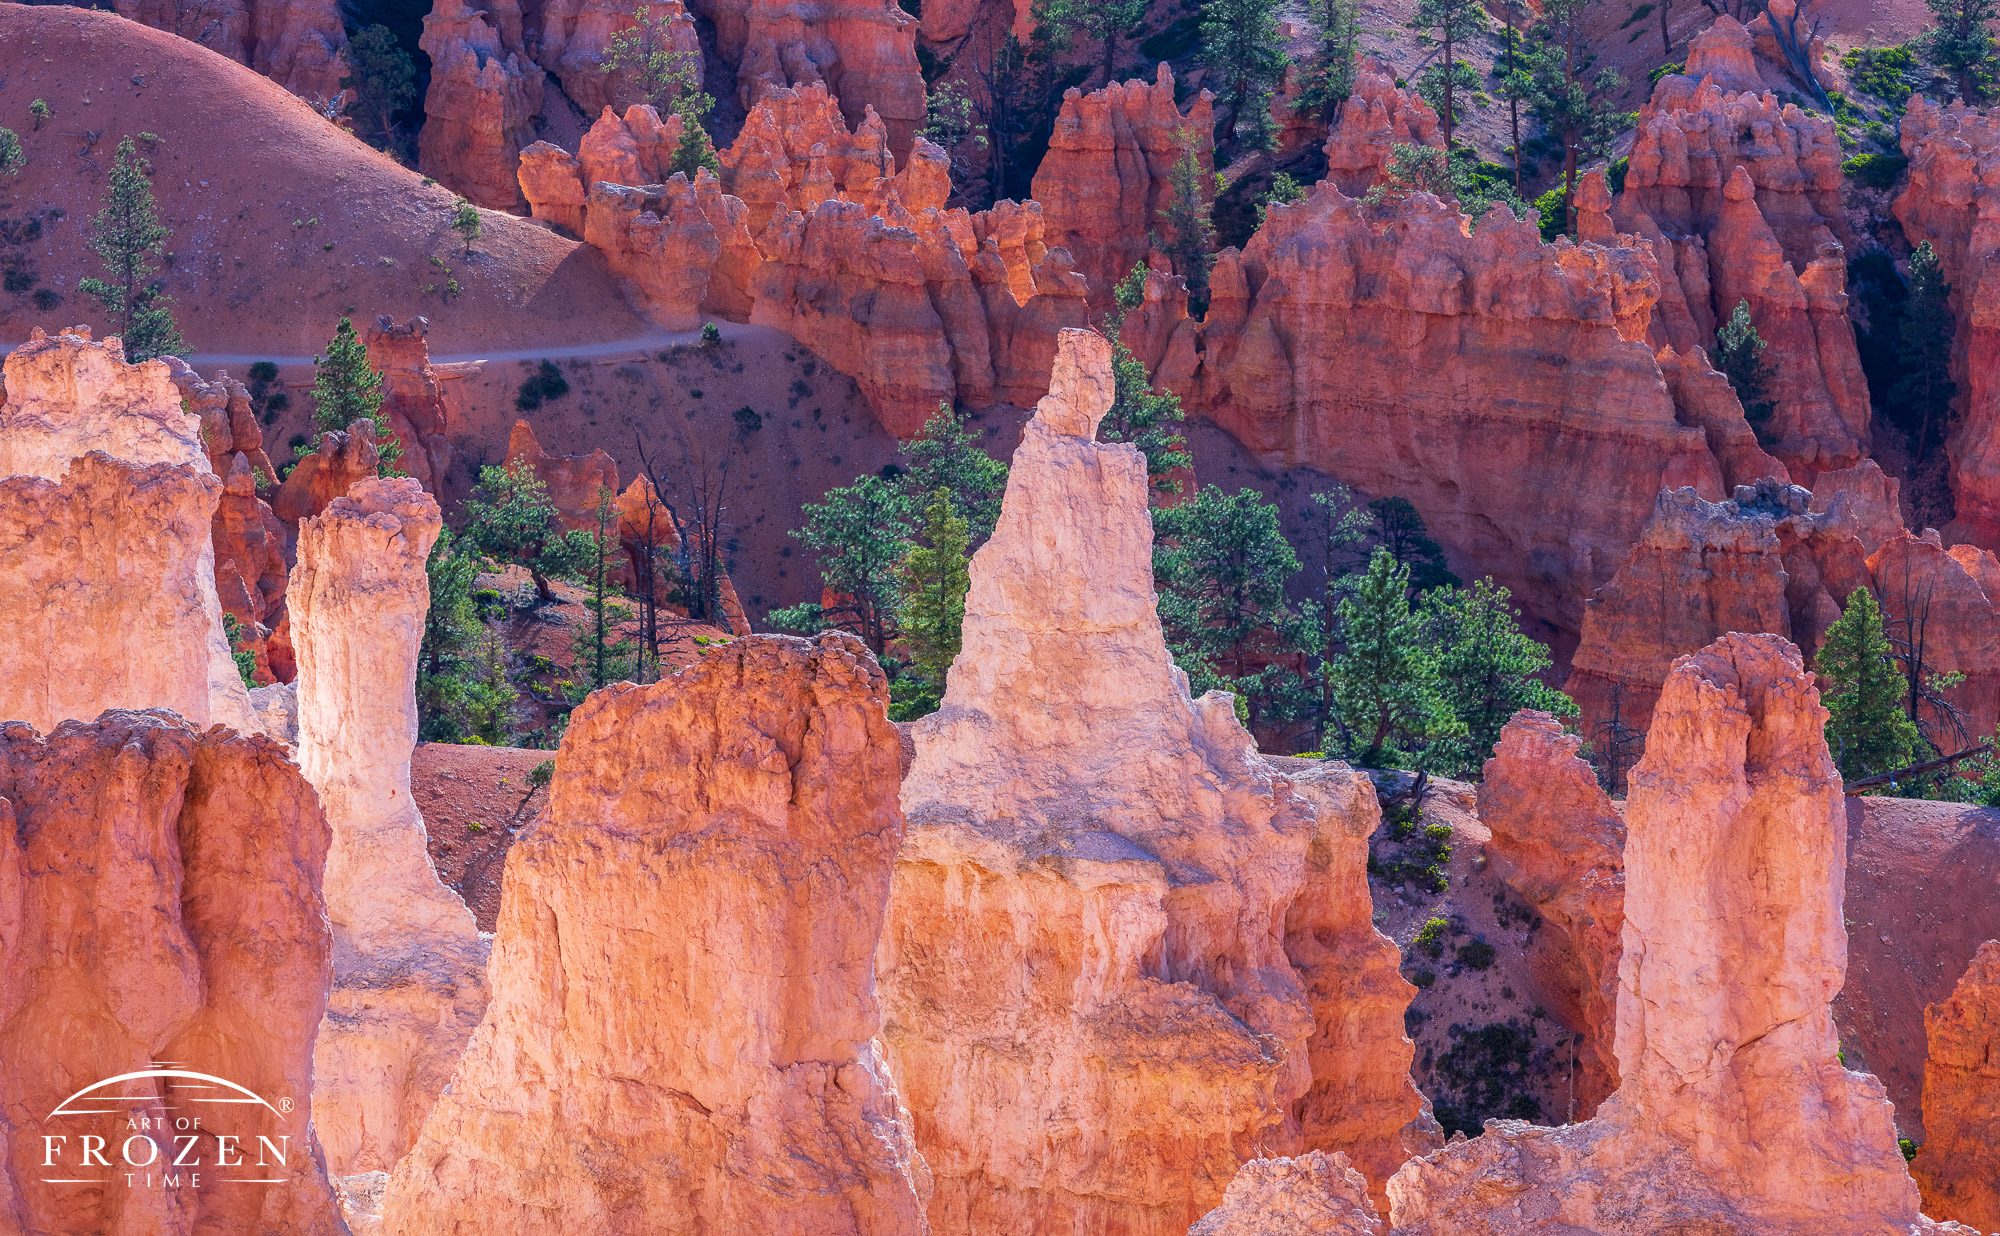 A telephoto view of Bryce Canyon hoodoos illuminated as the rising sun rakes light across their red and white sandstone layers.